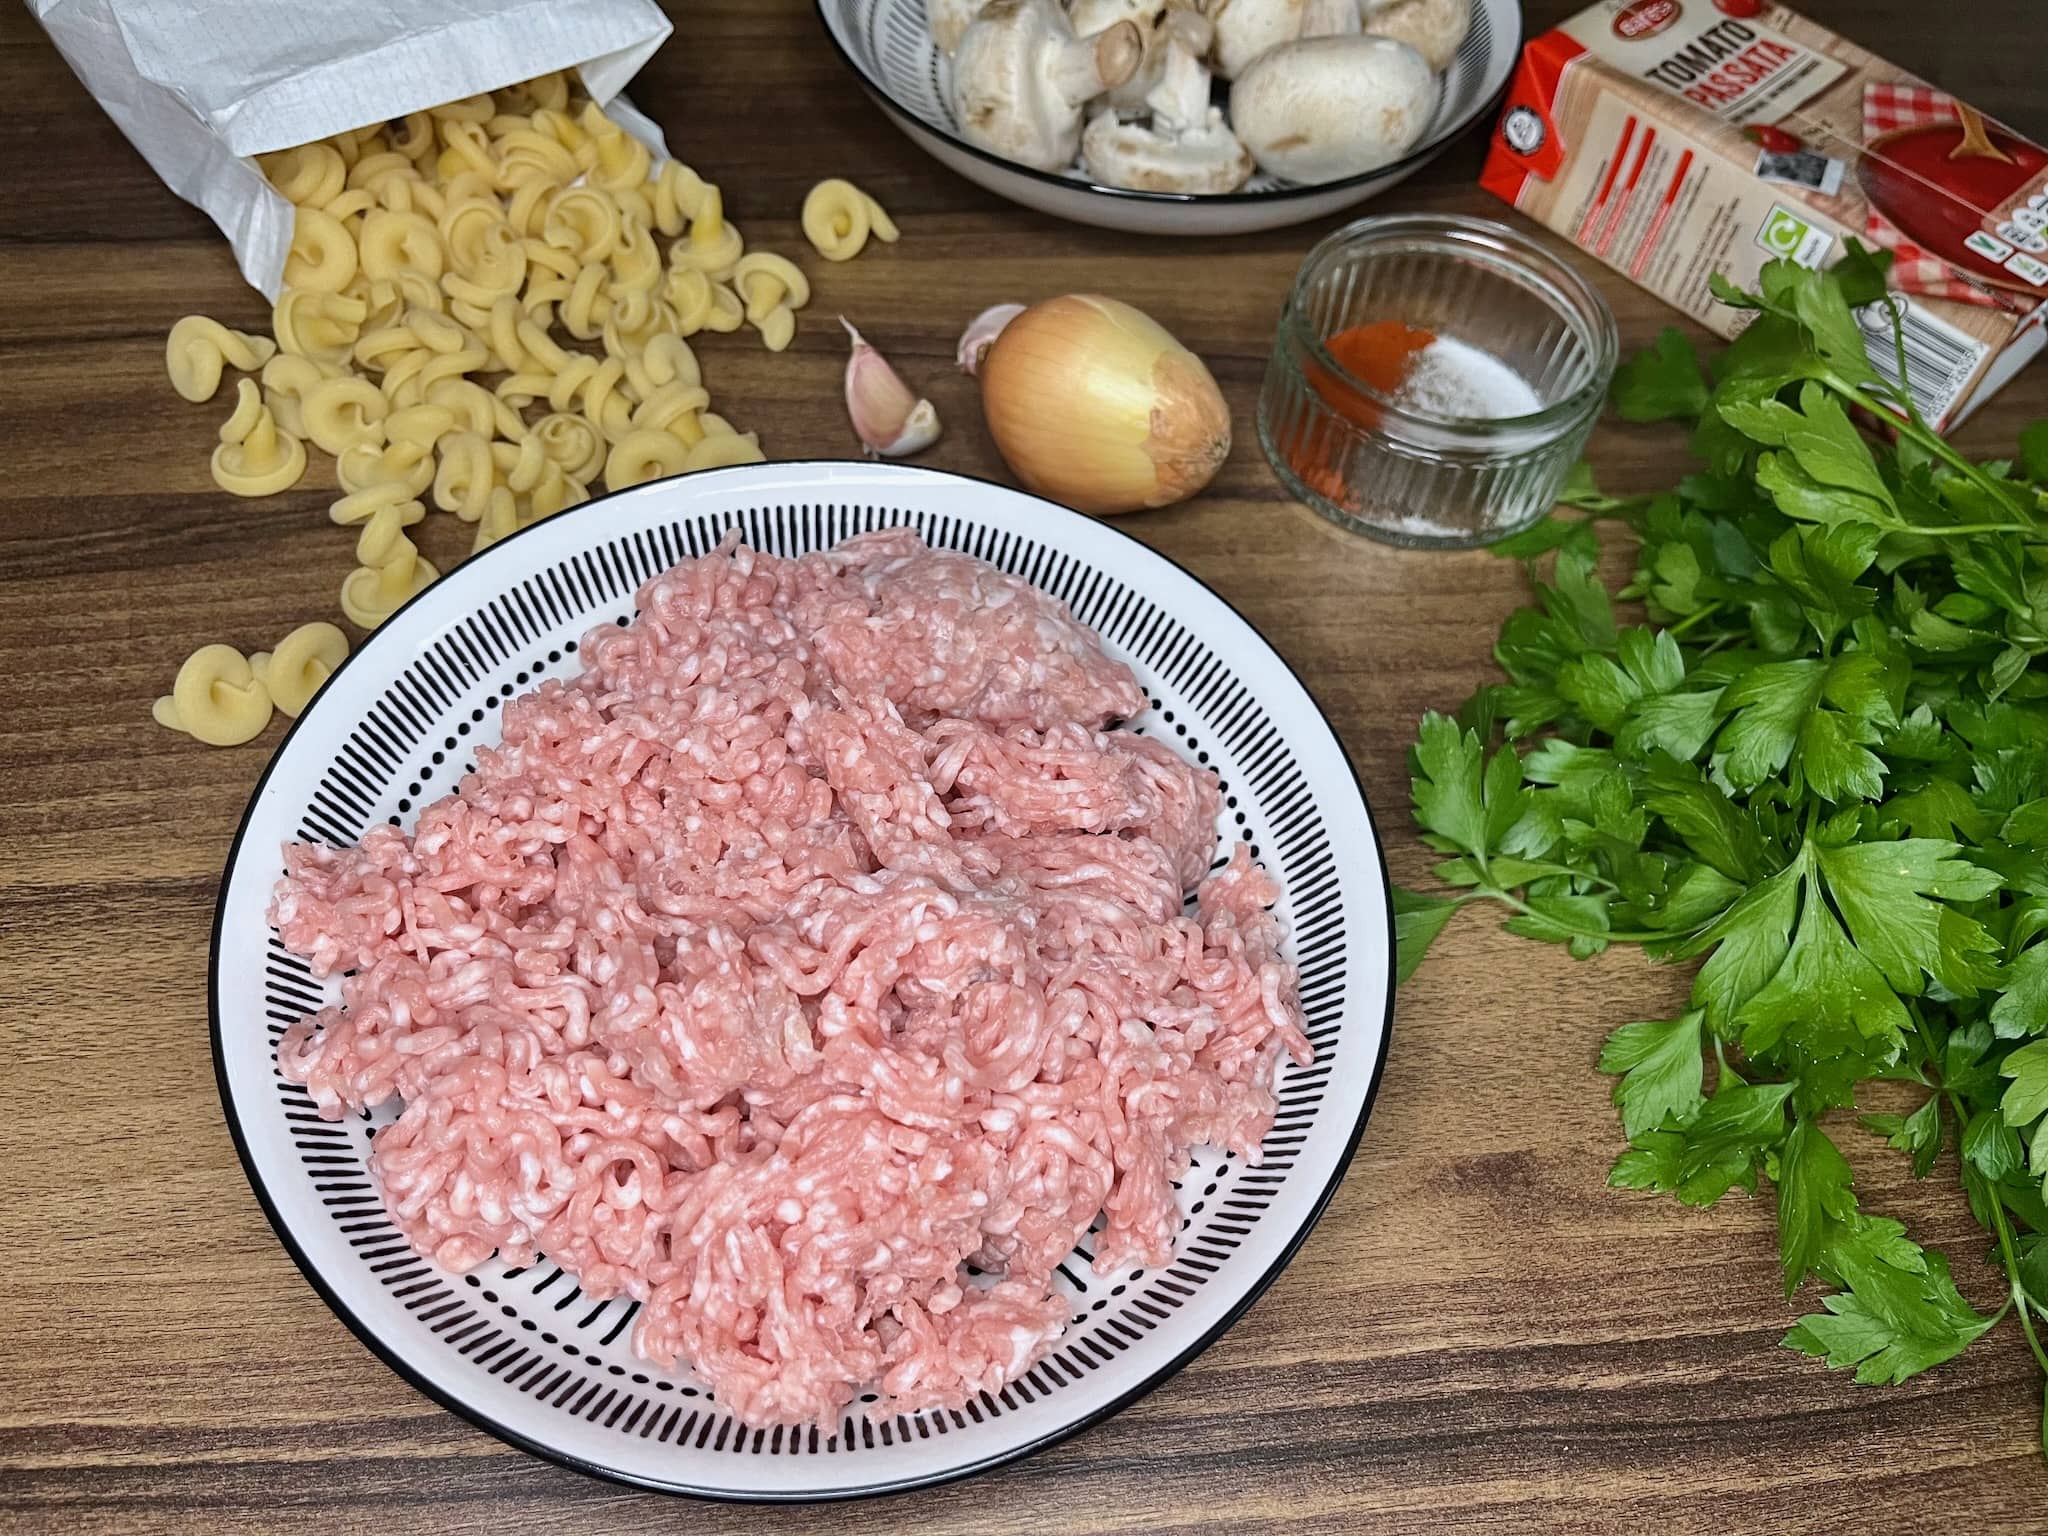 All the ingredients on the tabletop ready to make Pork and Mushrooms Pasta